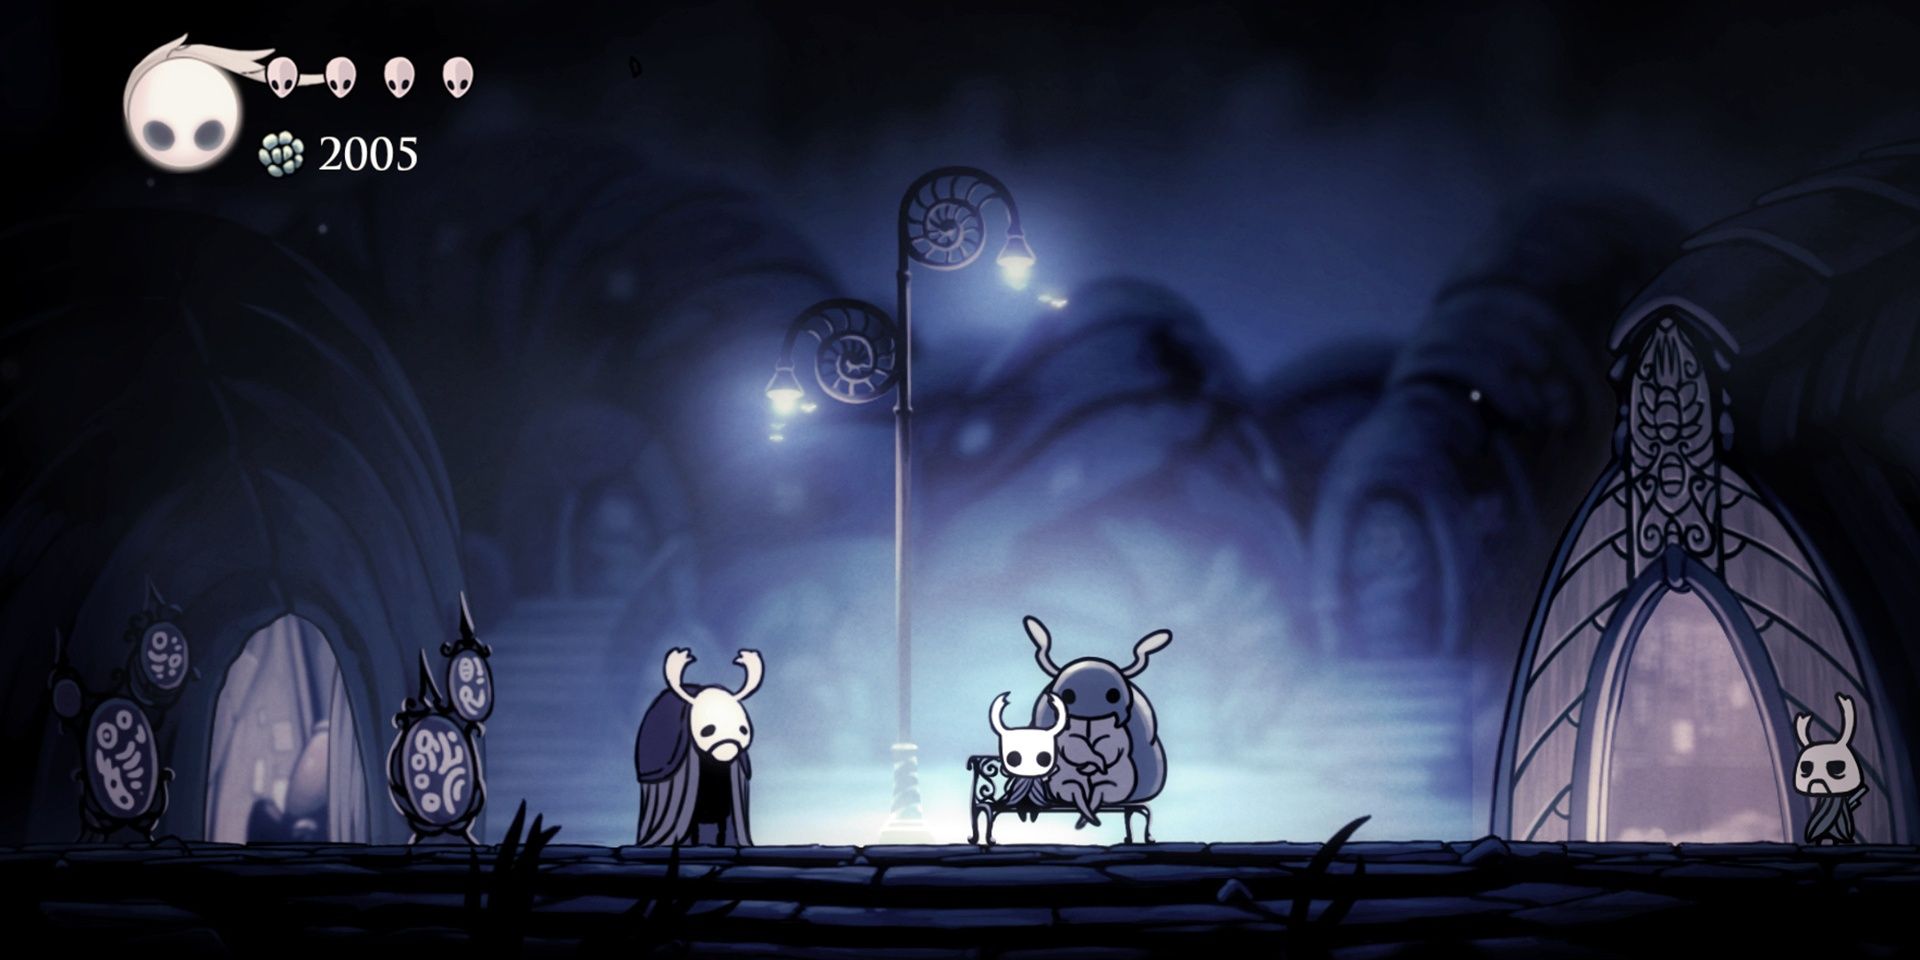 A screenshot showing a scene in Hollow Knight